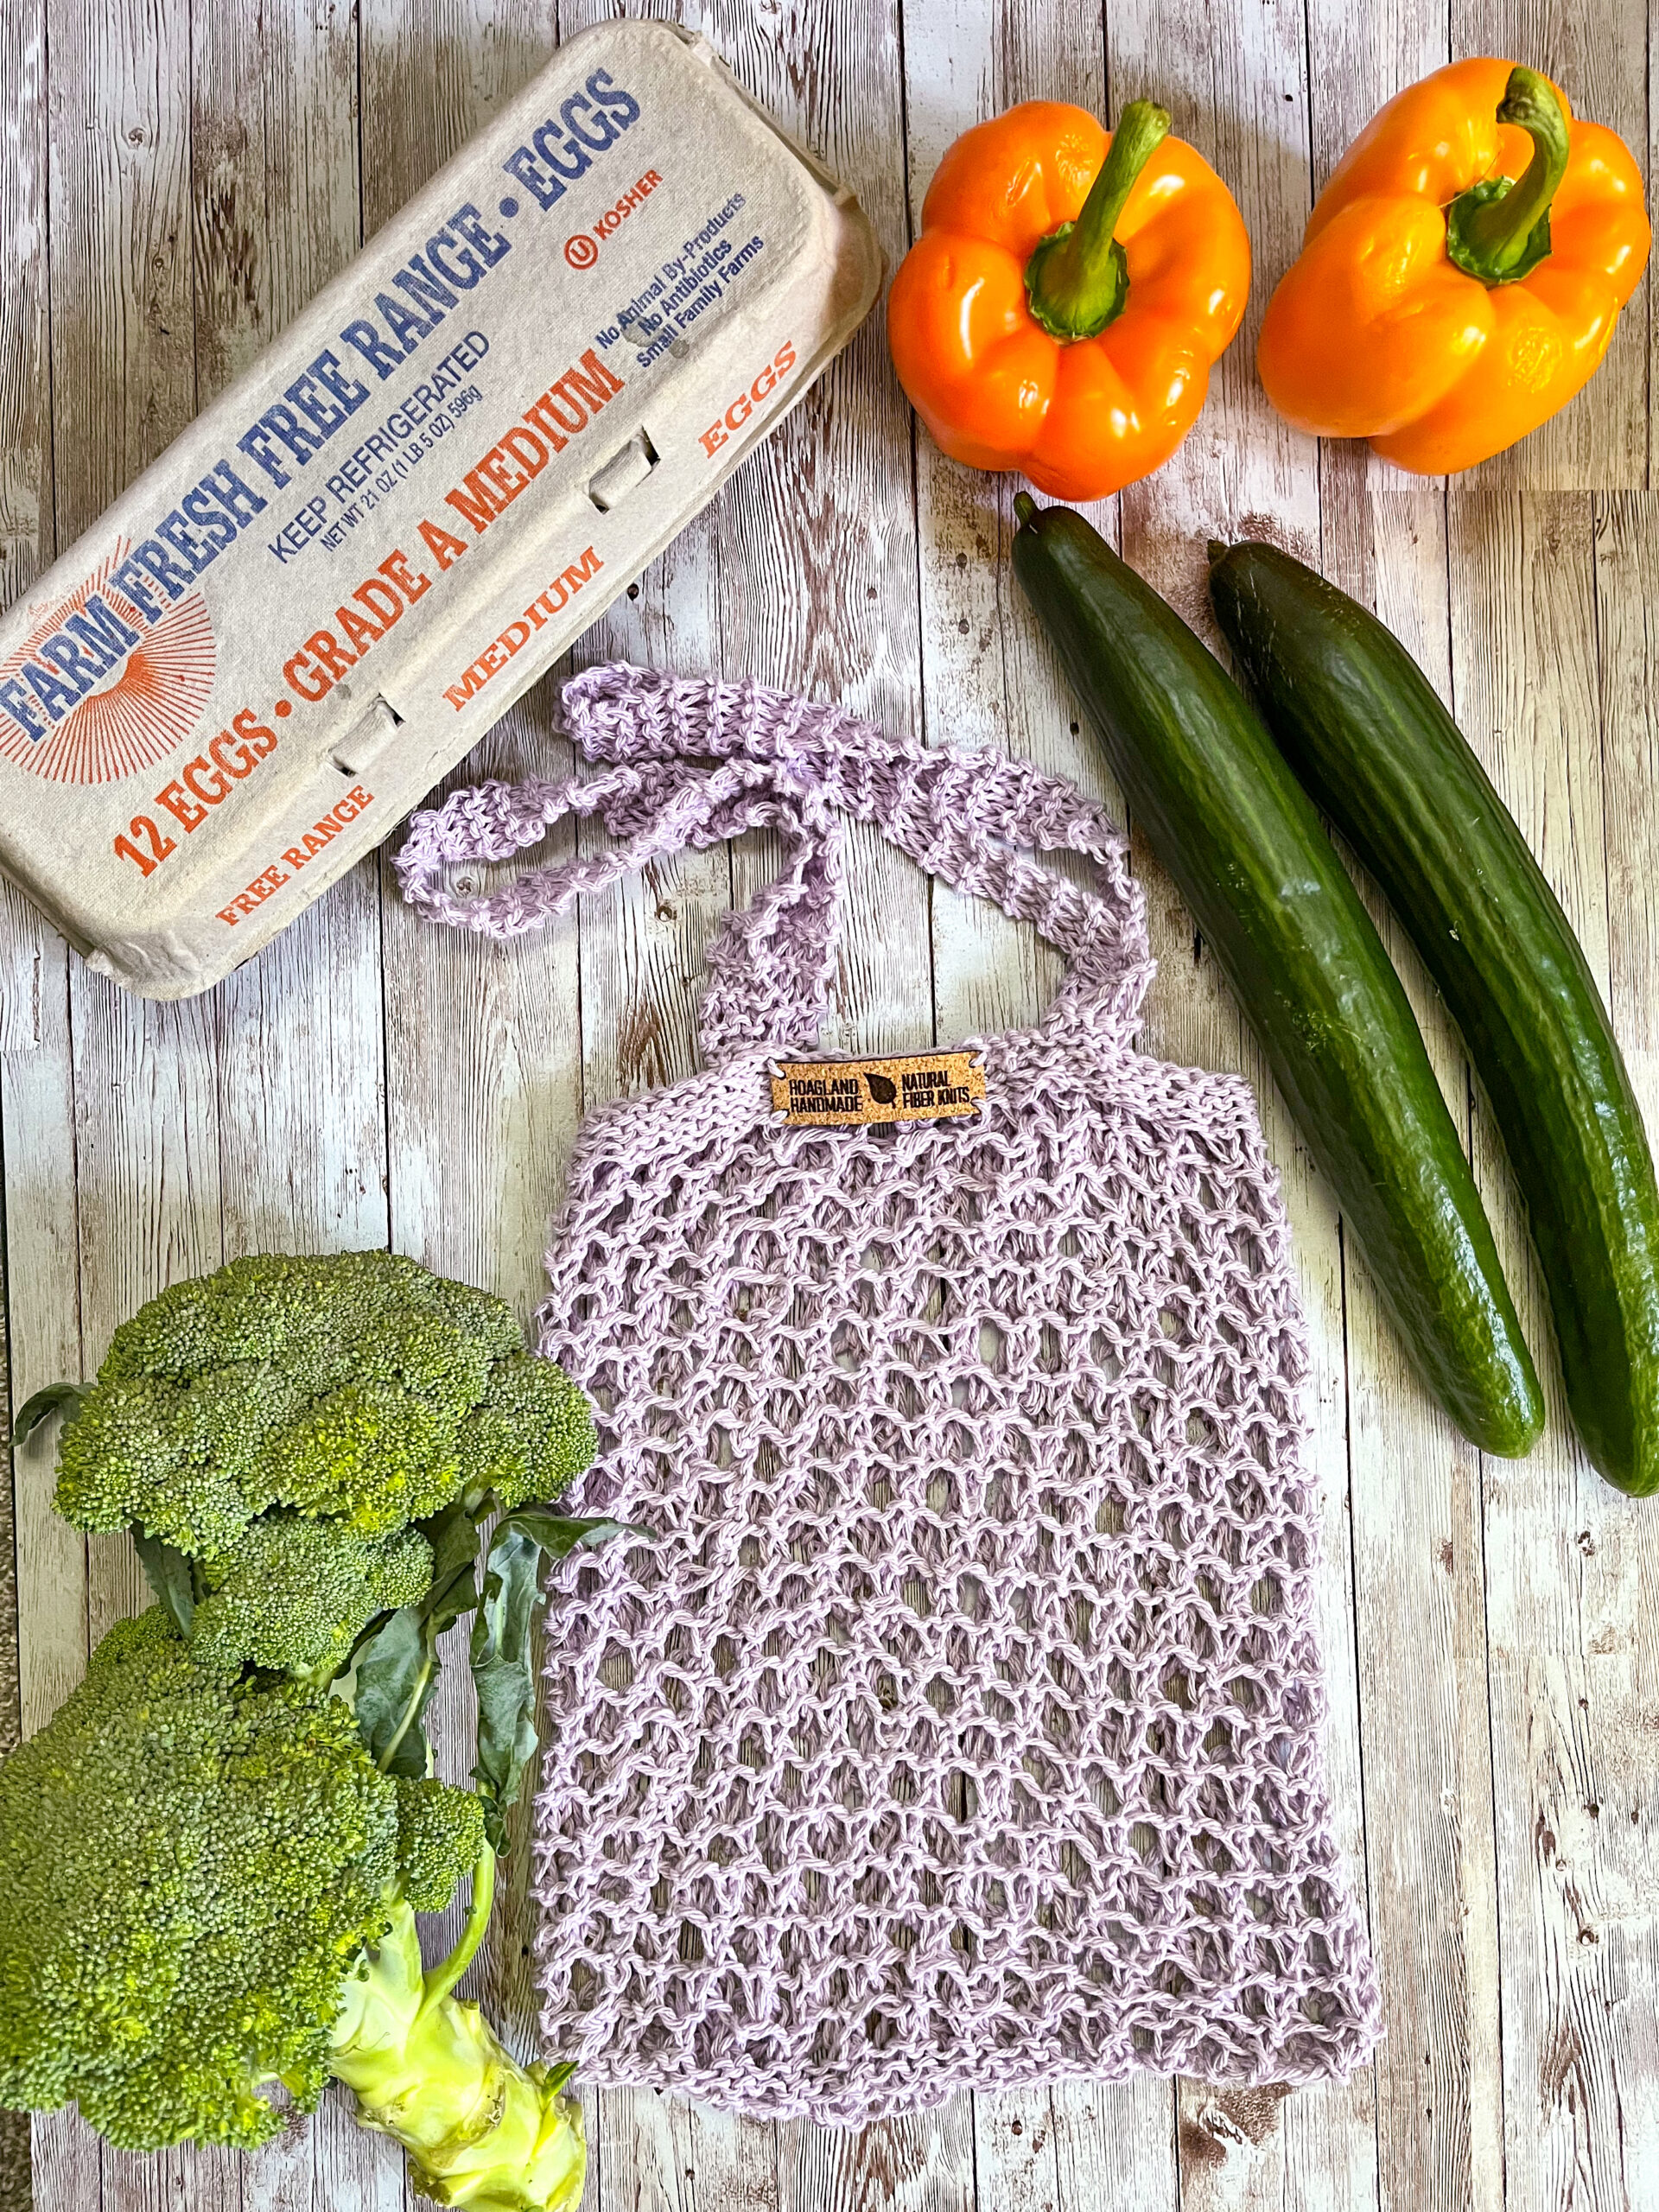 A purple recycled cotton mesh tote bag is surrounded by a carton of farm eggs, orange bell peppers, cucumbers, and broccoli